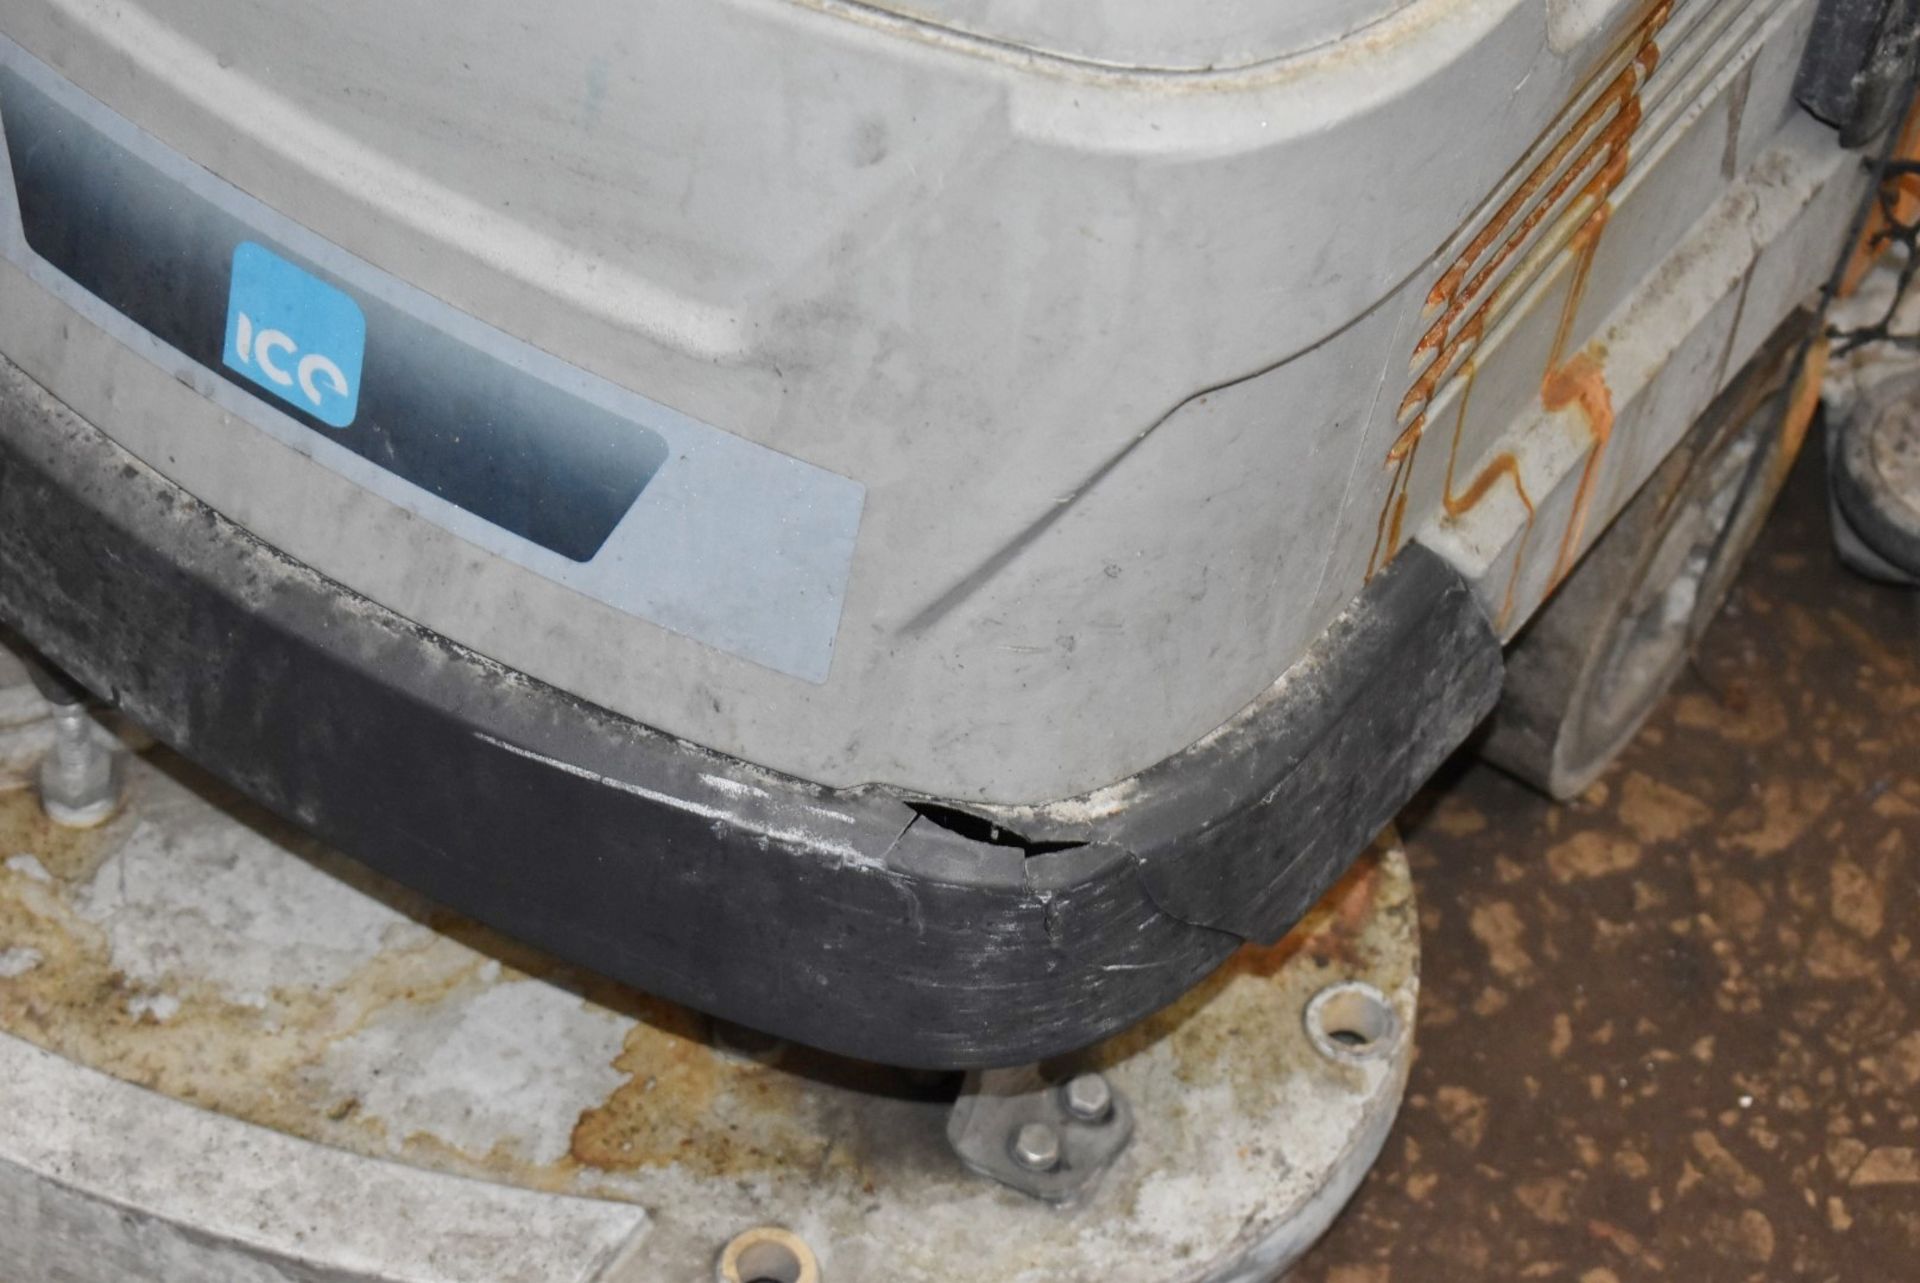 1 x Ice Scrub 65D Commercial Floor Scrubber Dryer - Recently Removed From a Supermarket - Image 5 of 16